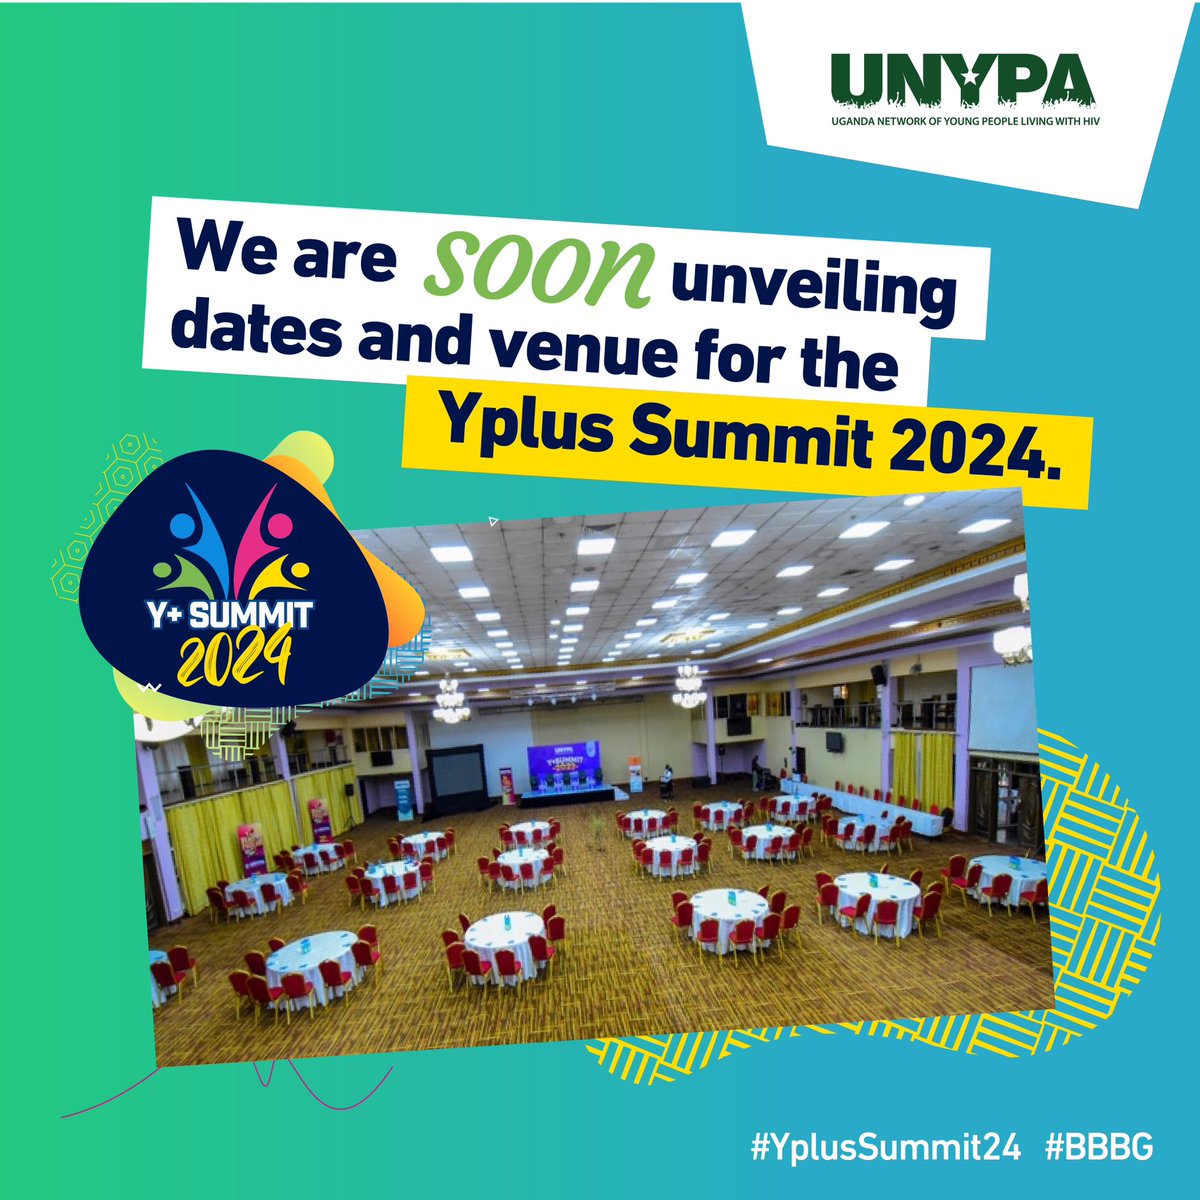 Lock your eyes 👀  here because we are soon unveiling. 

#YPlusSummit24. 
#BBBG